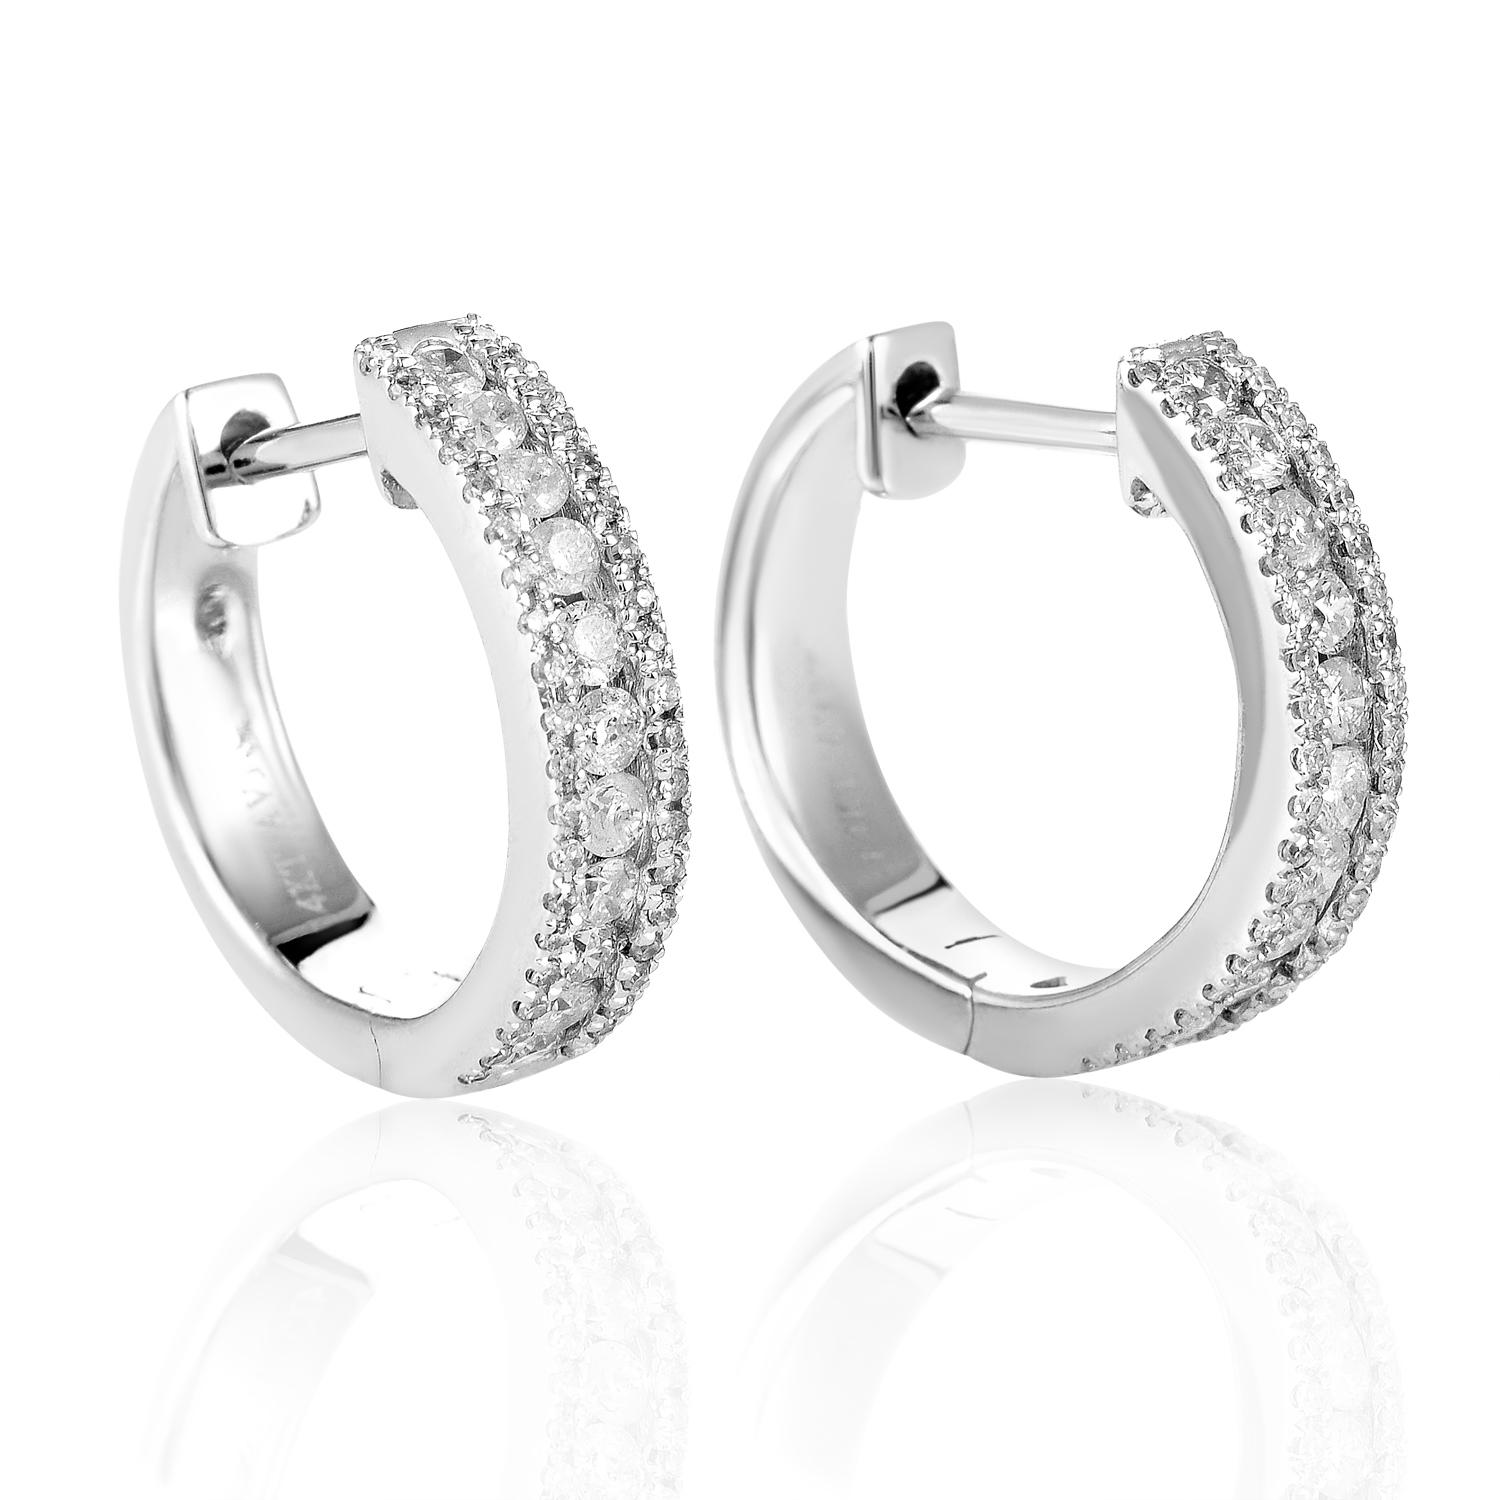 Catching your eye with their marvelous resplendence and revealing the true beauty of their intricate design upon a closer look, these nifty earrings are made of 14K white gold and lined with lustrous diamonds totaling 0.70ct.